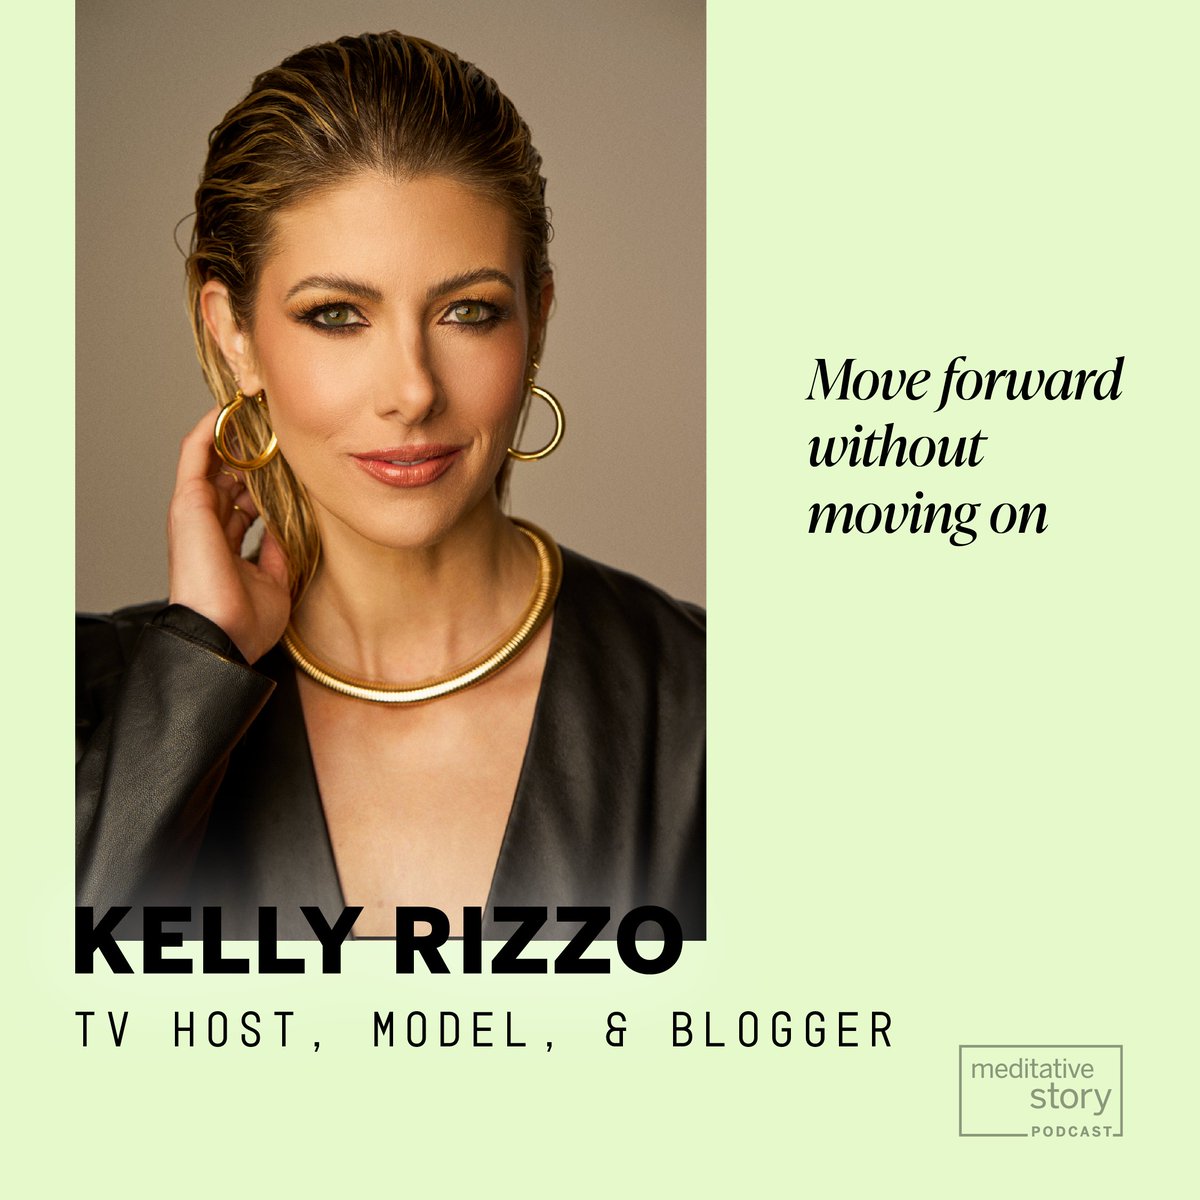 Grief is a force that everyone will encounter, but there are times when it hits without warning. Today, Kelly Rizzo (@EatTravelRock) shares how, in the wake of her husband's passing, she learns that moving forward doesn’t mean moving on. Listen now: listen.meditativestory.com/kelly